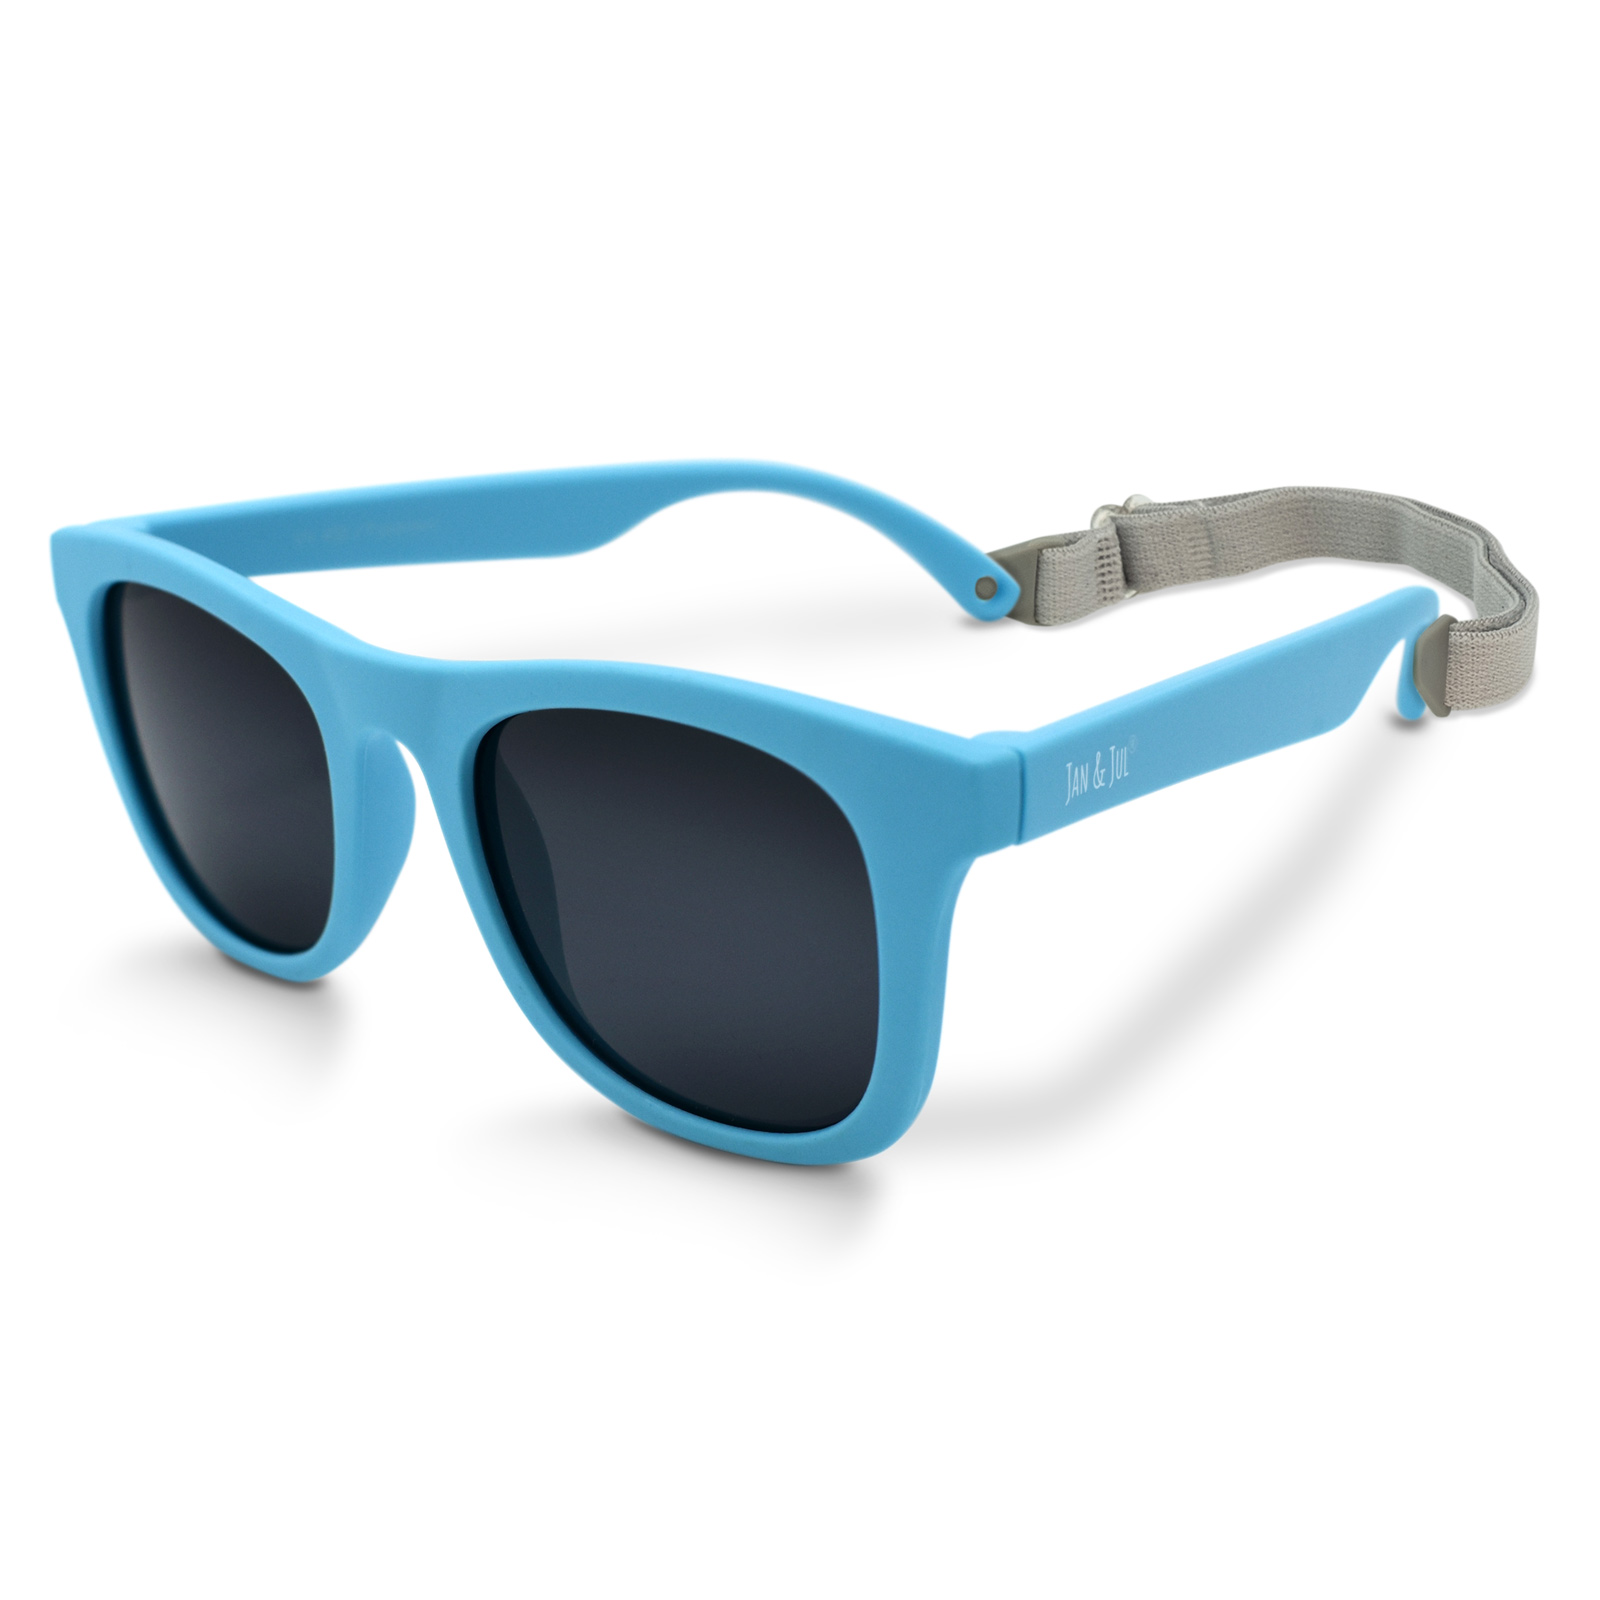 Jan & Jul Baby Sunglasses with Strap Adjustable, Unbreakable Frames (S: 6 Months -2 Years, Sky Blue) - image 1 of 7